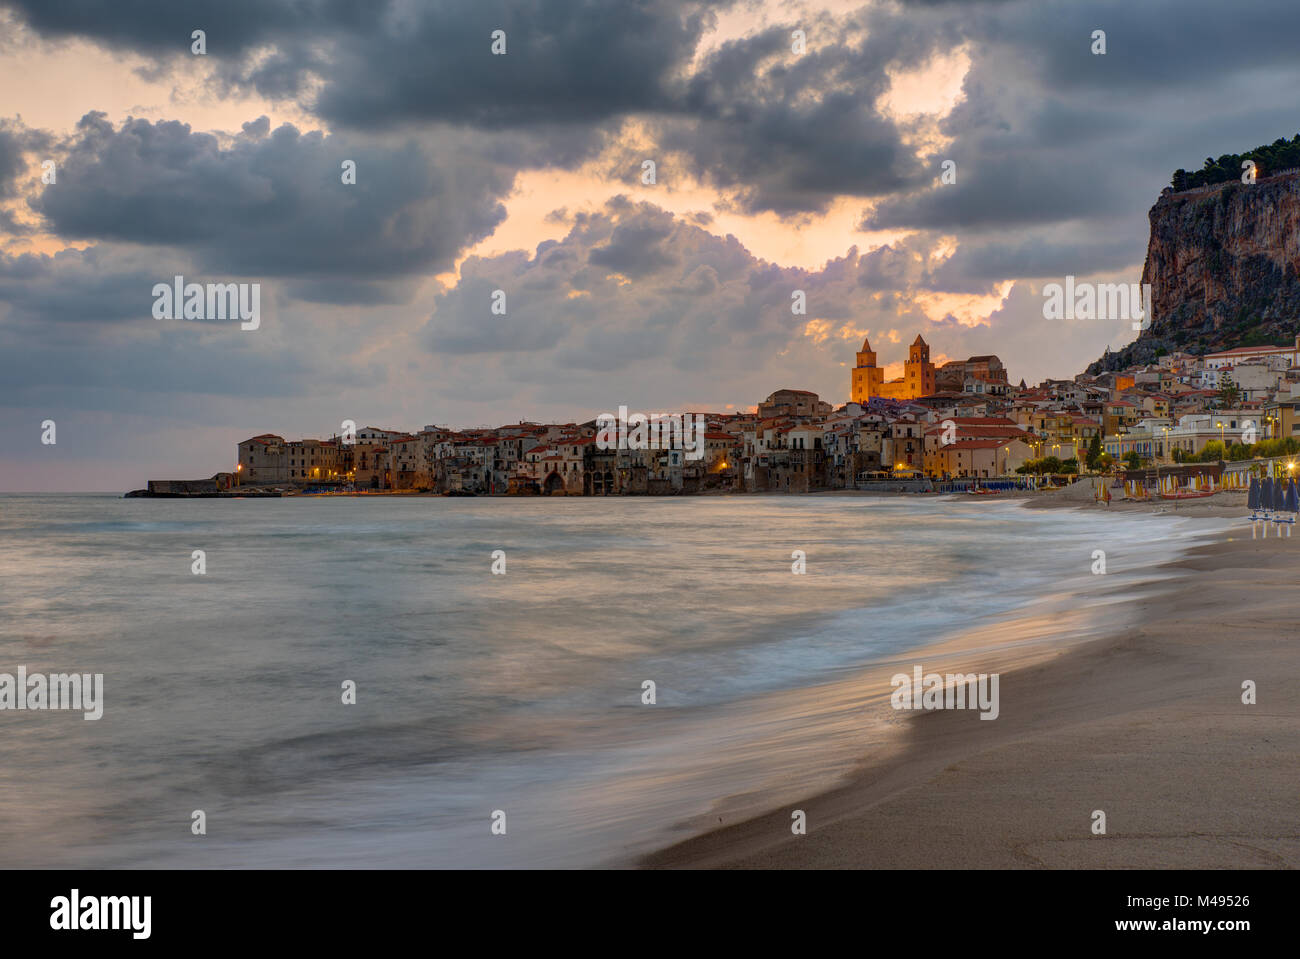 The beach at Cefalu in Sicily before sunrise Stock Photo